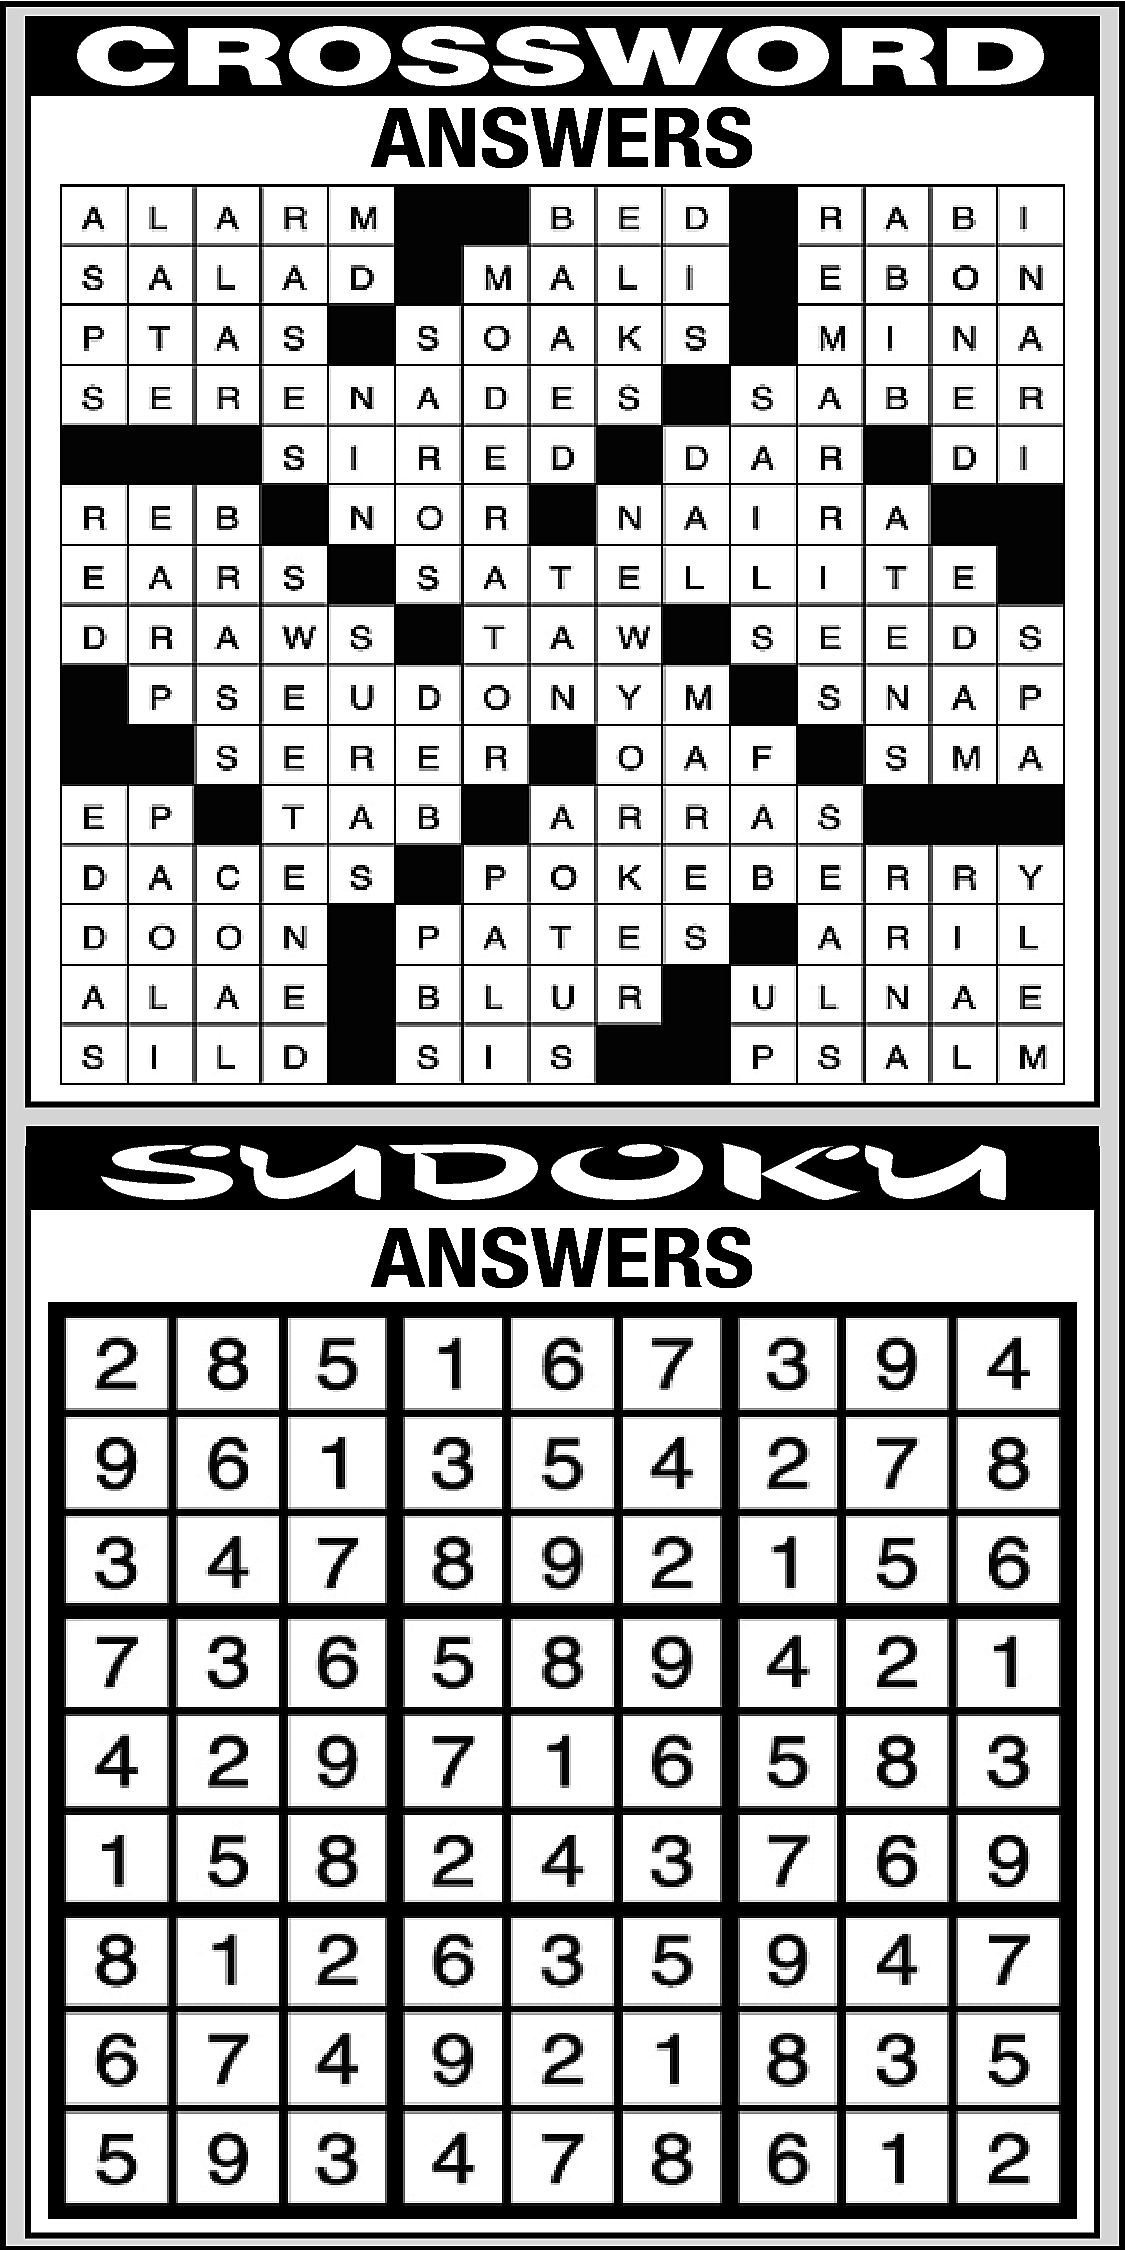 CROSSWORD <br>ANSWERS <br> <br>SUDOKU <br>ANSWERS  CROSSWORD  ANSWERS    SUDOKU  ANSWERS    